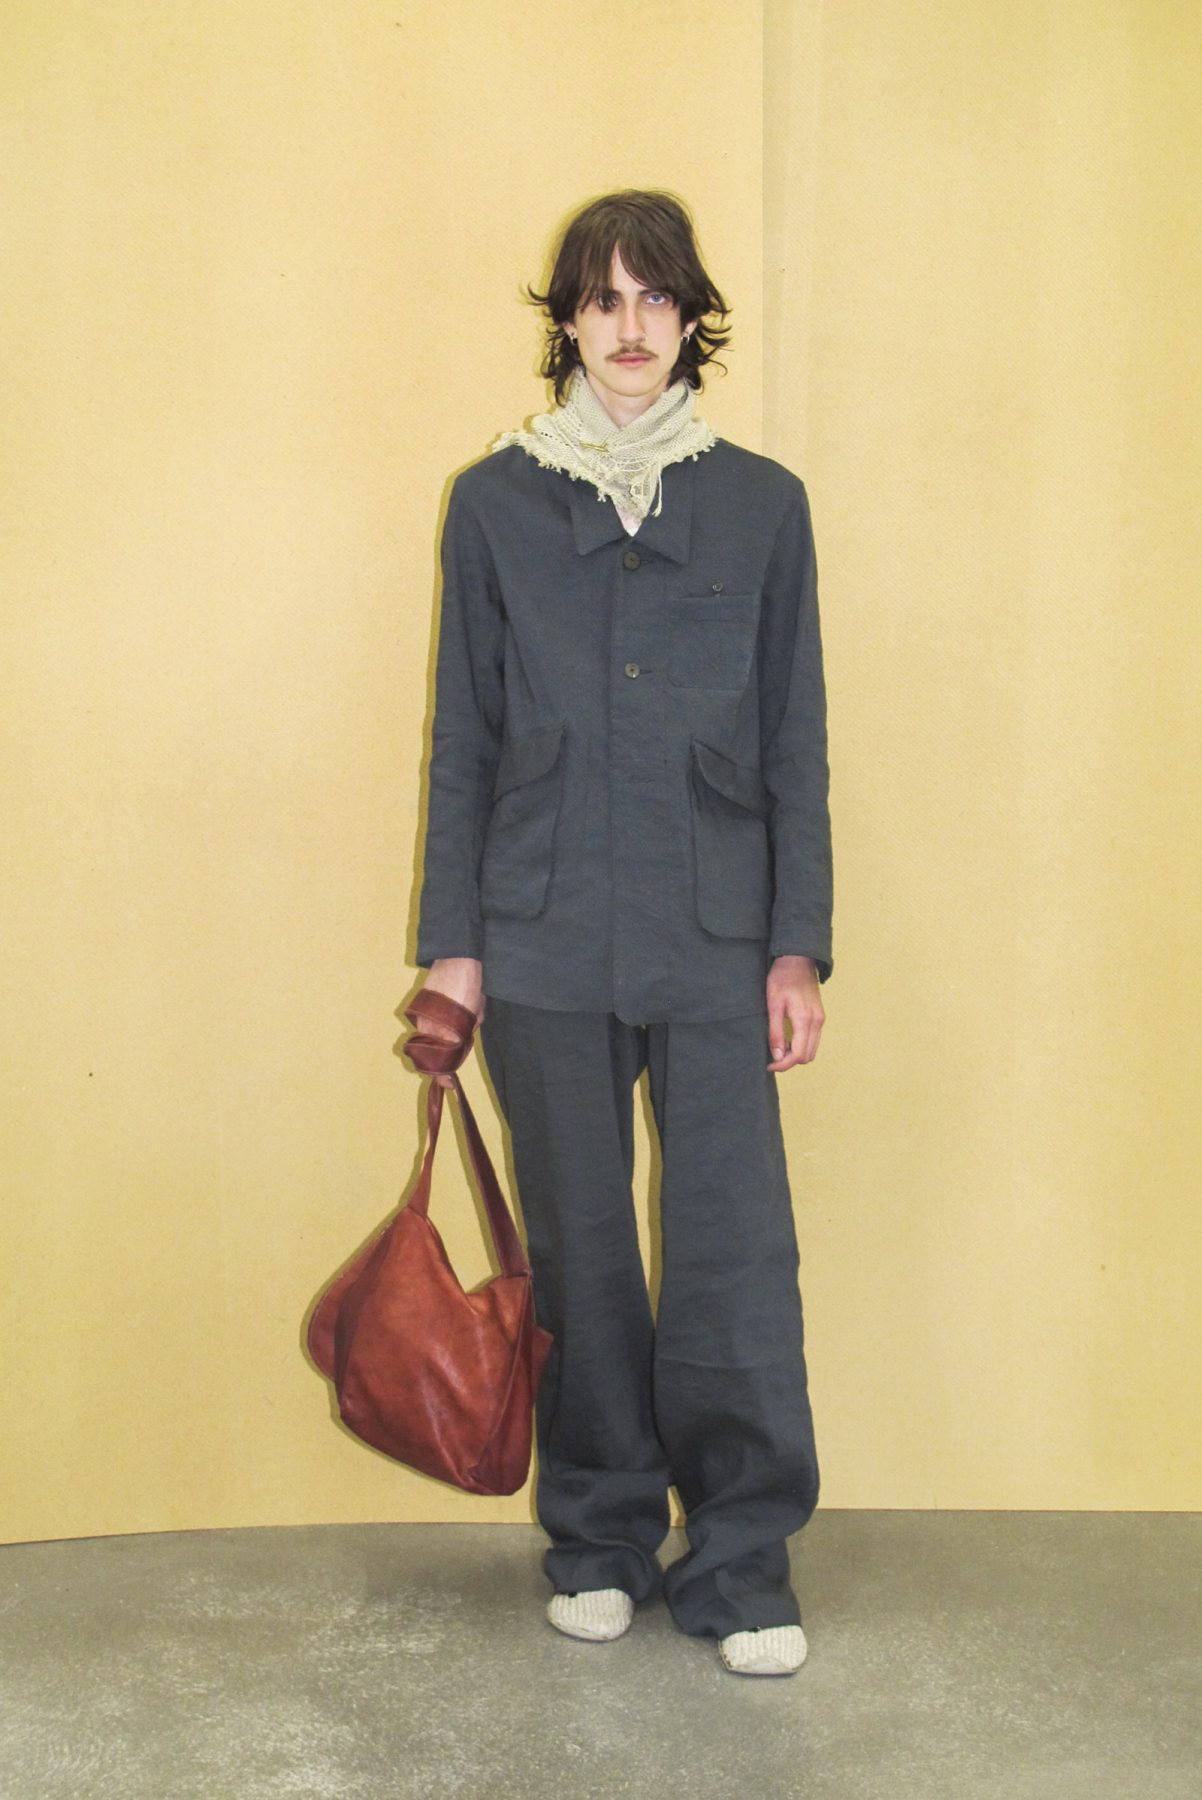 Model wearing a grey jacket, grey loose trousers and brown leather bag